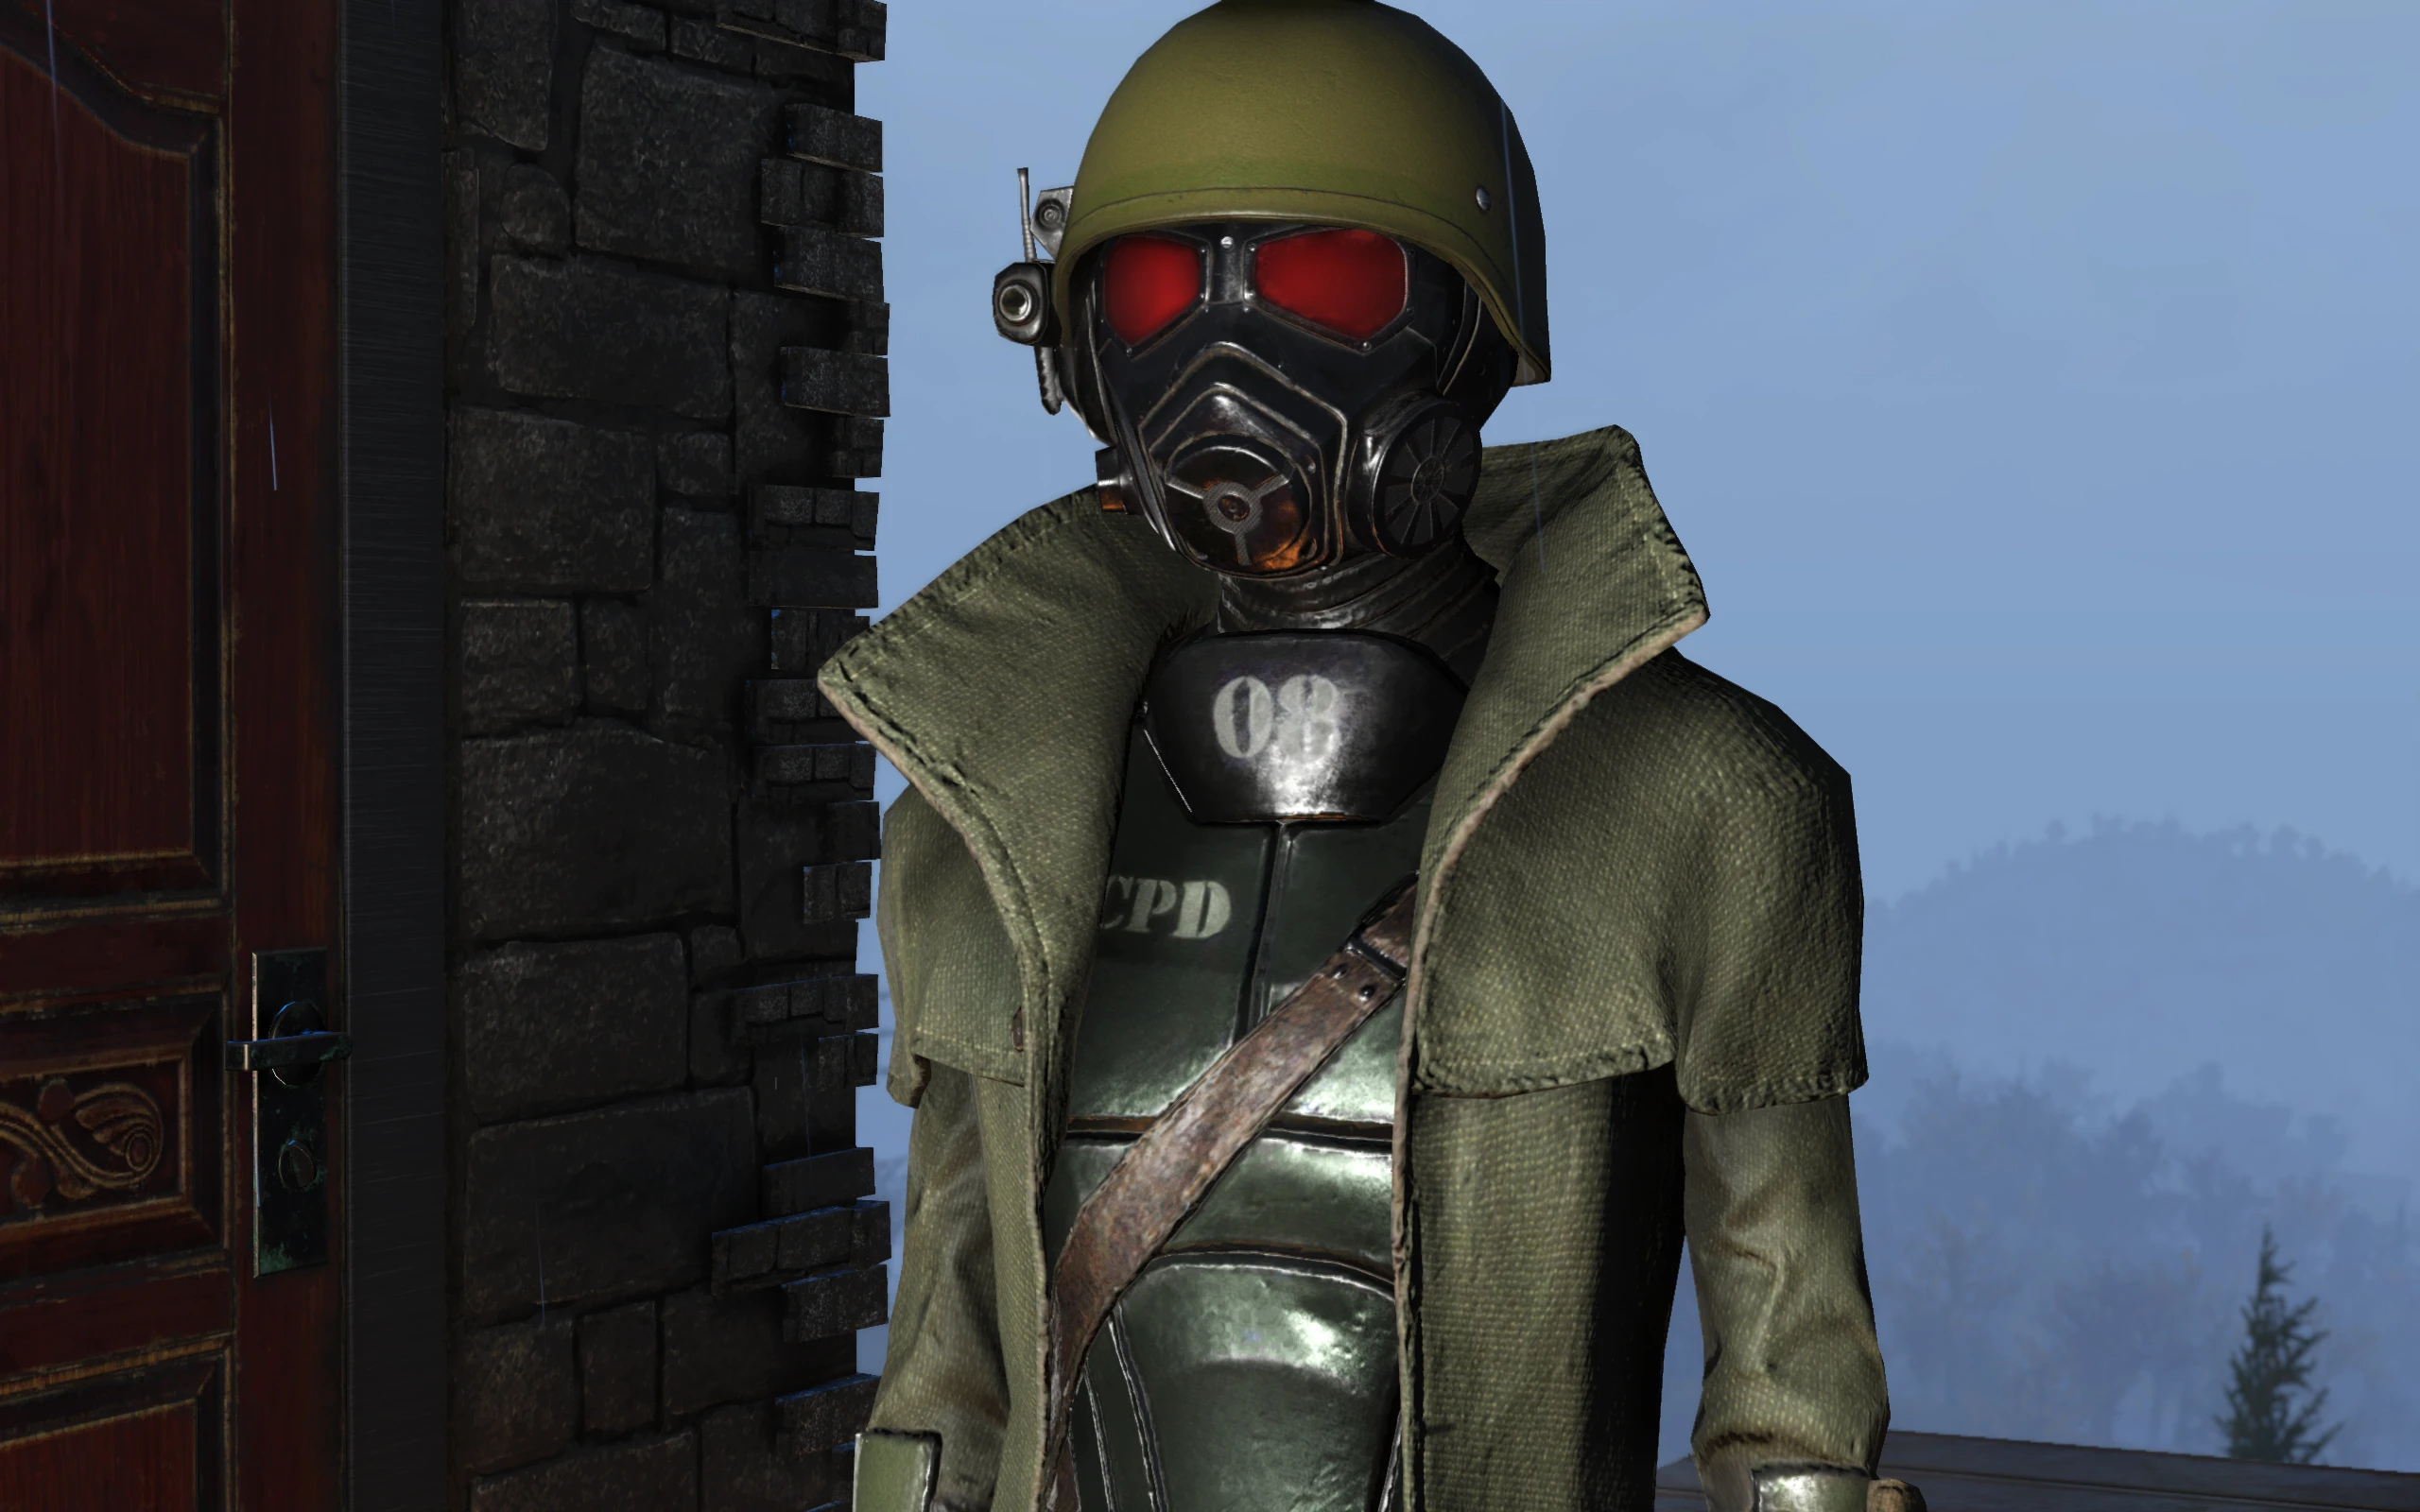 Gallery of Fallout Ranger Outfit.